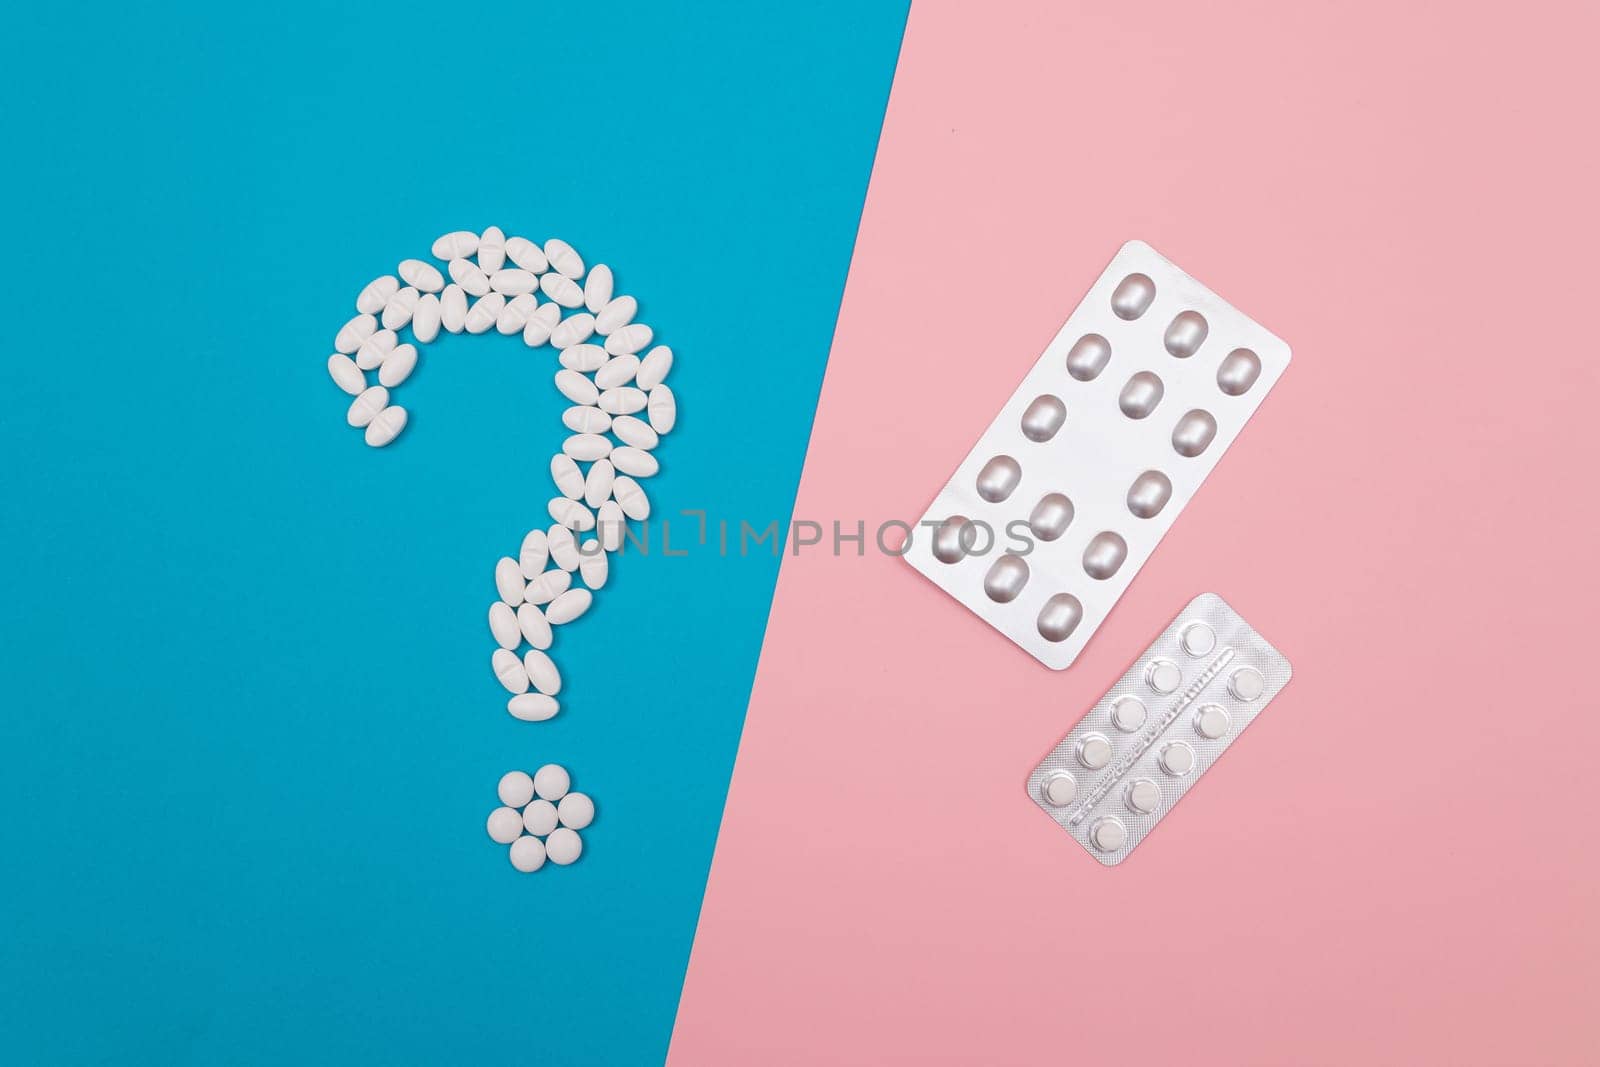 Question Mark Made from White Pills and Tablets with Pill Packages, Lying on Split Blue and Pink Background. Global Pharmaceutical Industry and Medicinal Products